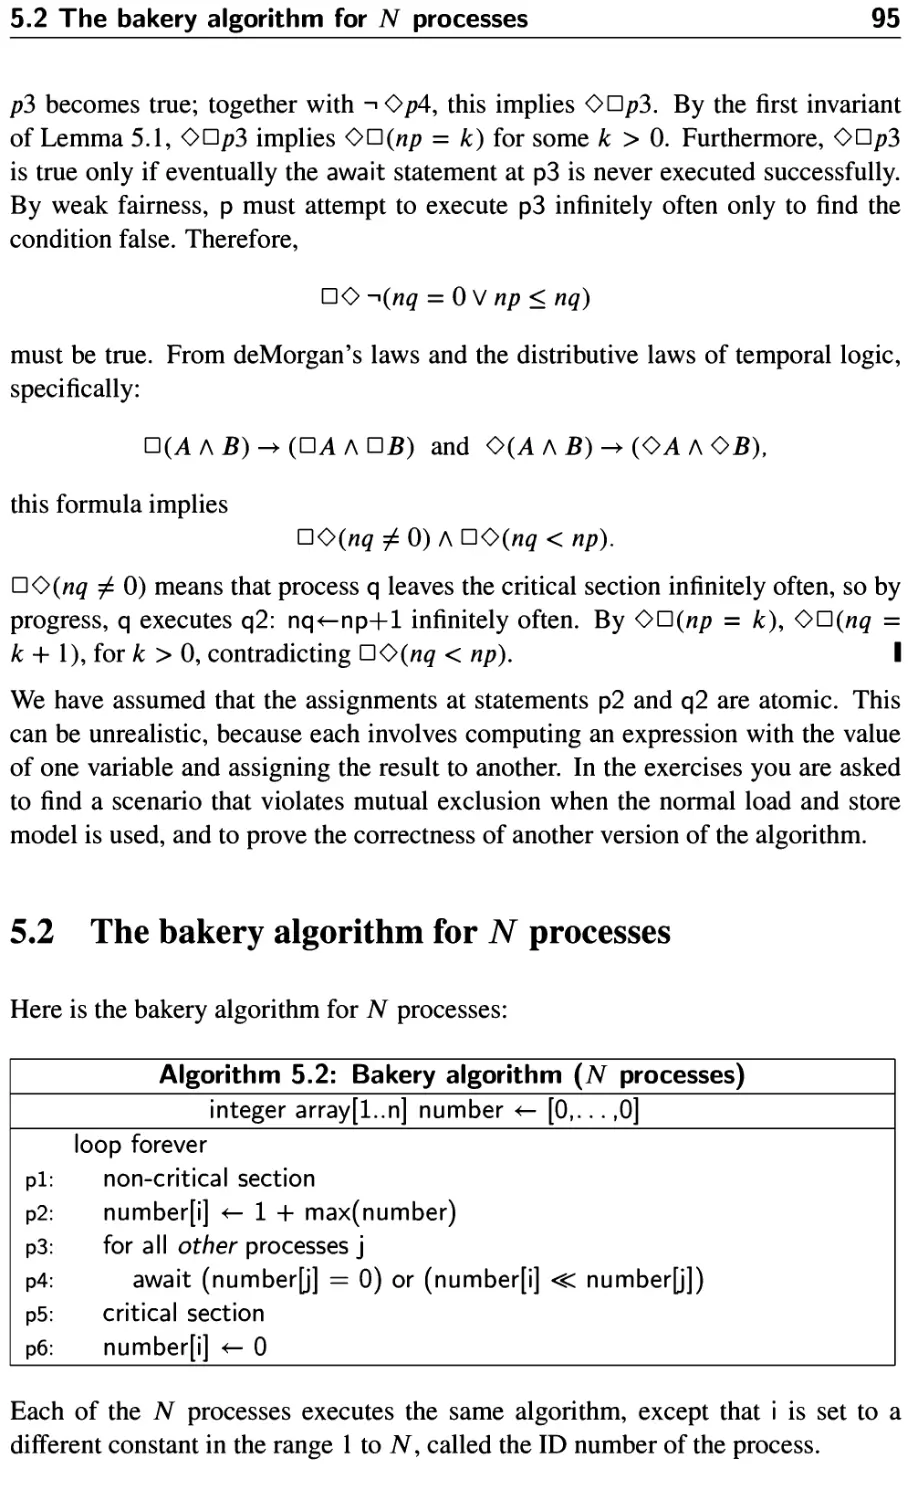 5.2 The bakery algorithm for N processes